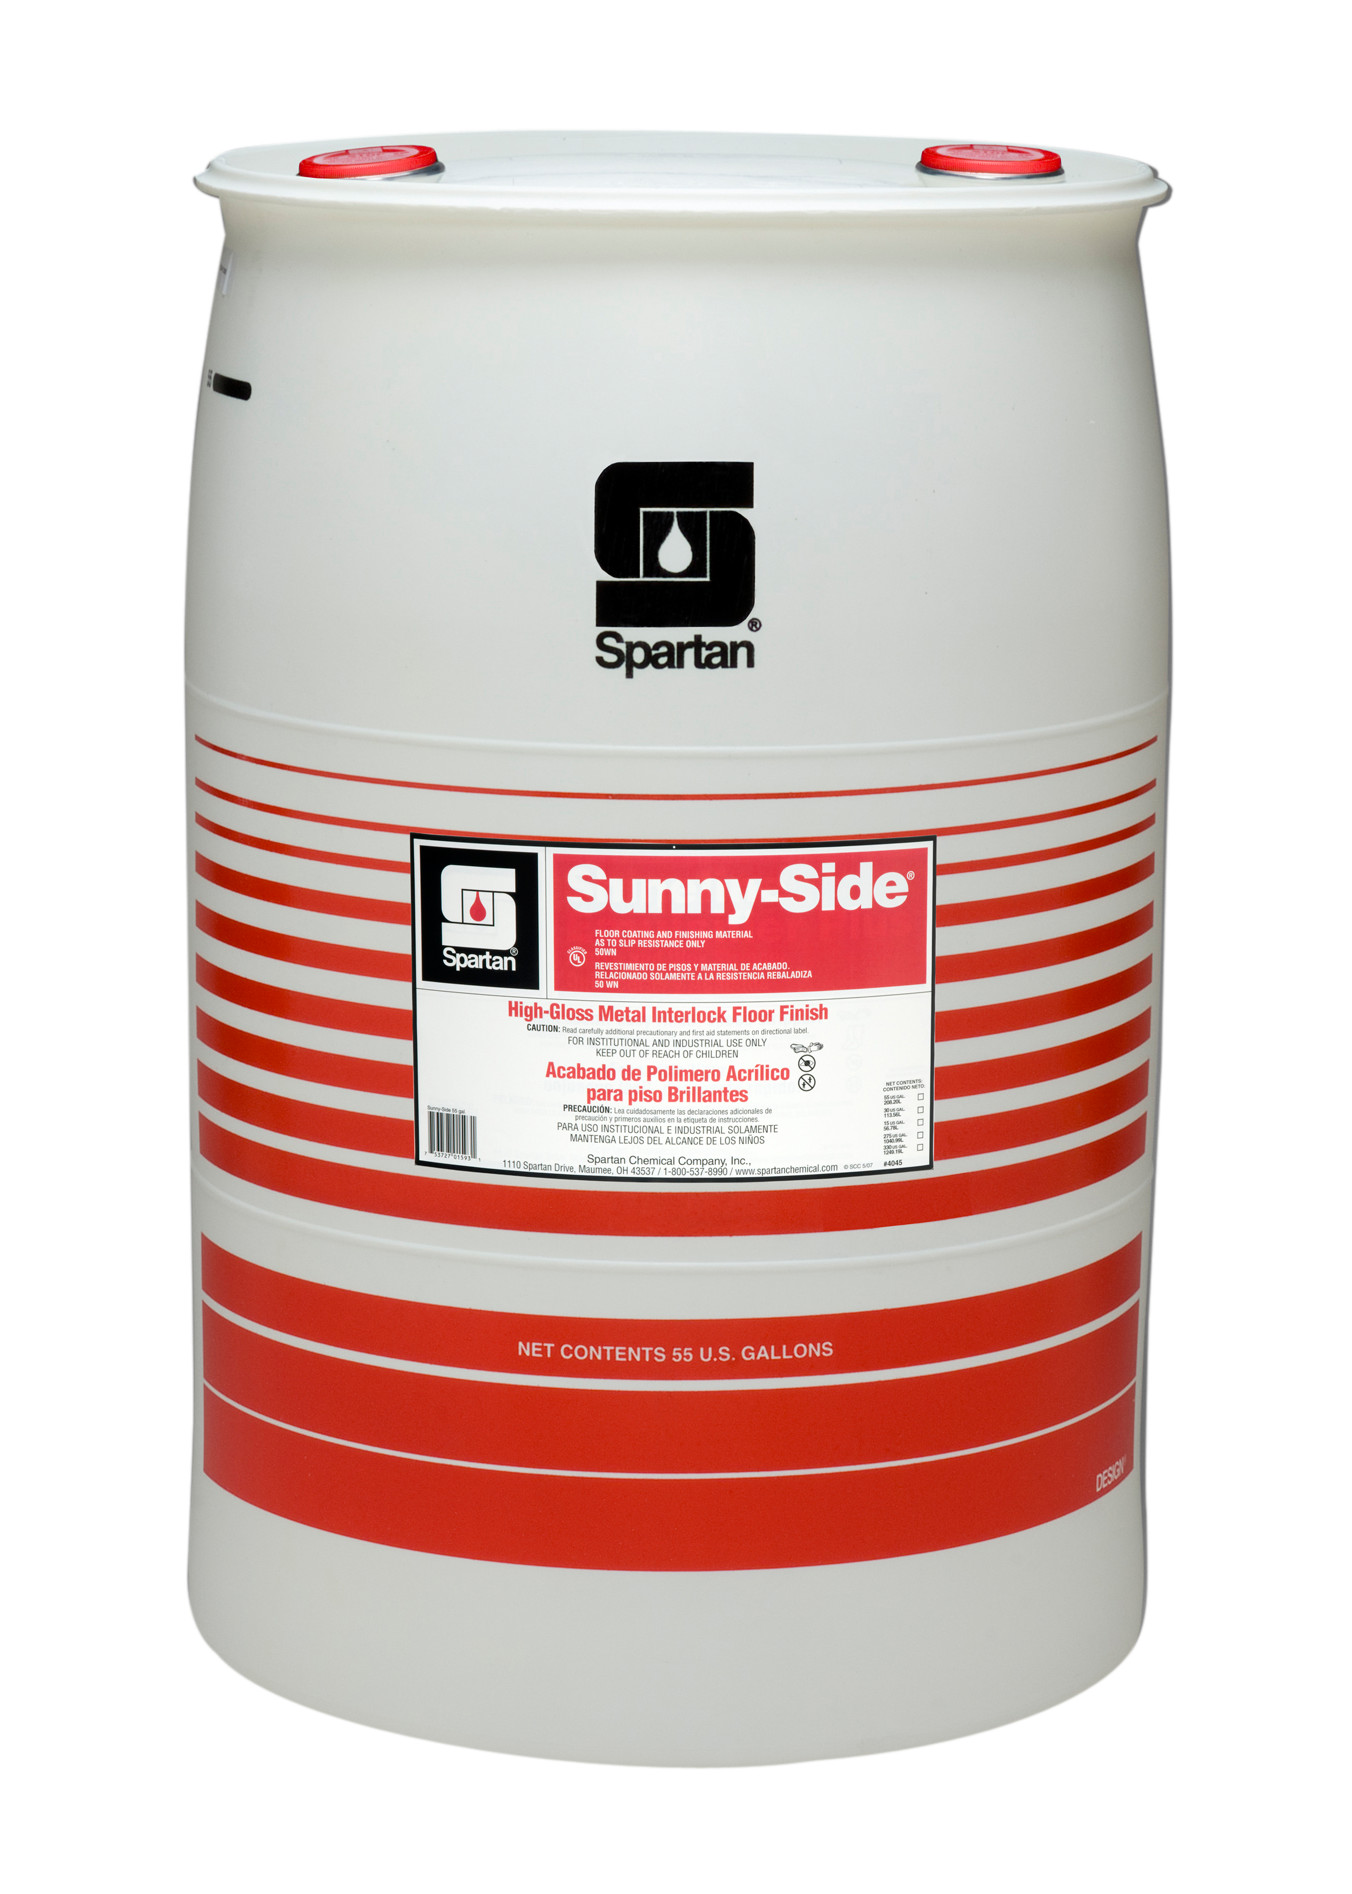 Spartan Chemical Company Sunny-Side, 55 GAL DRUM